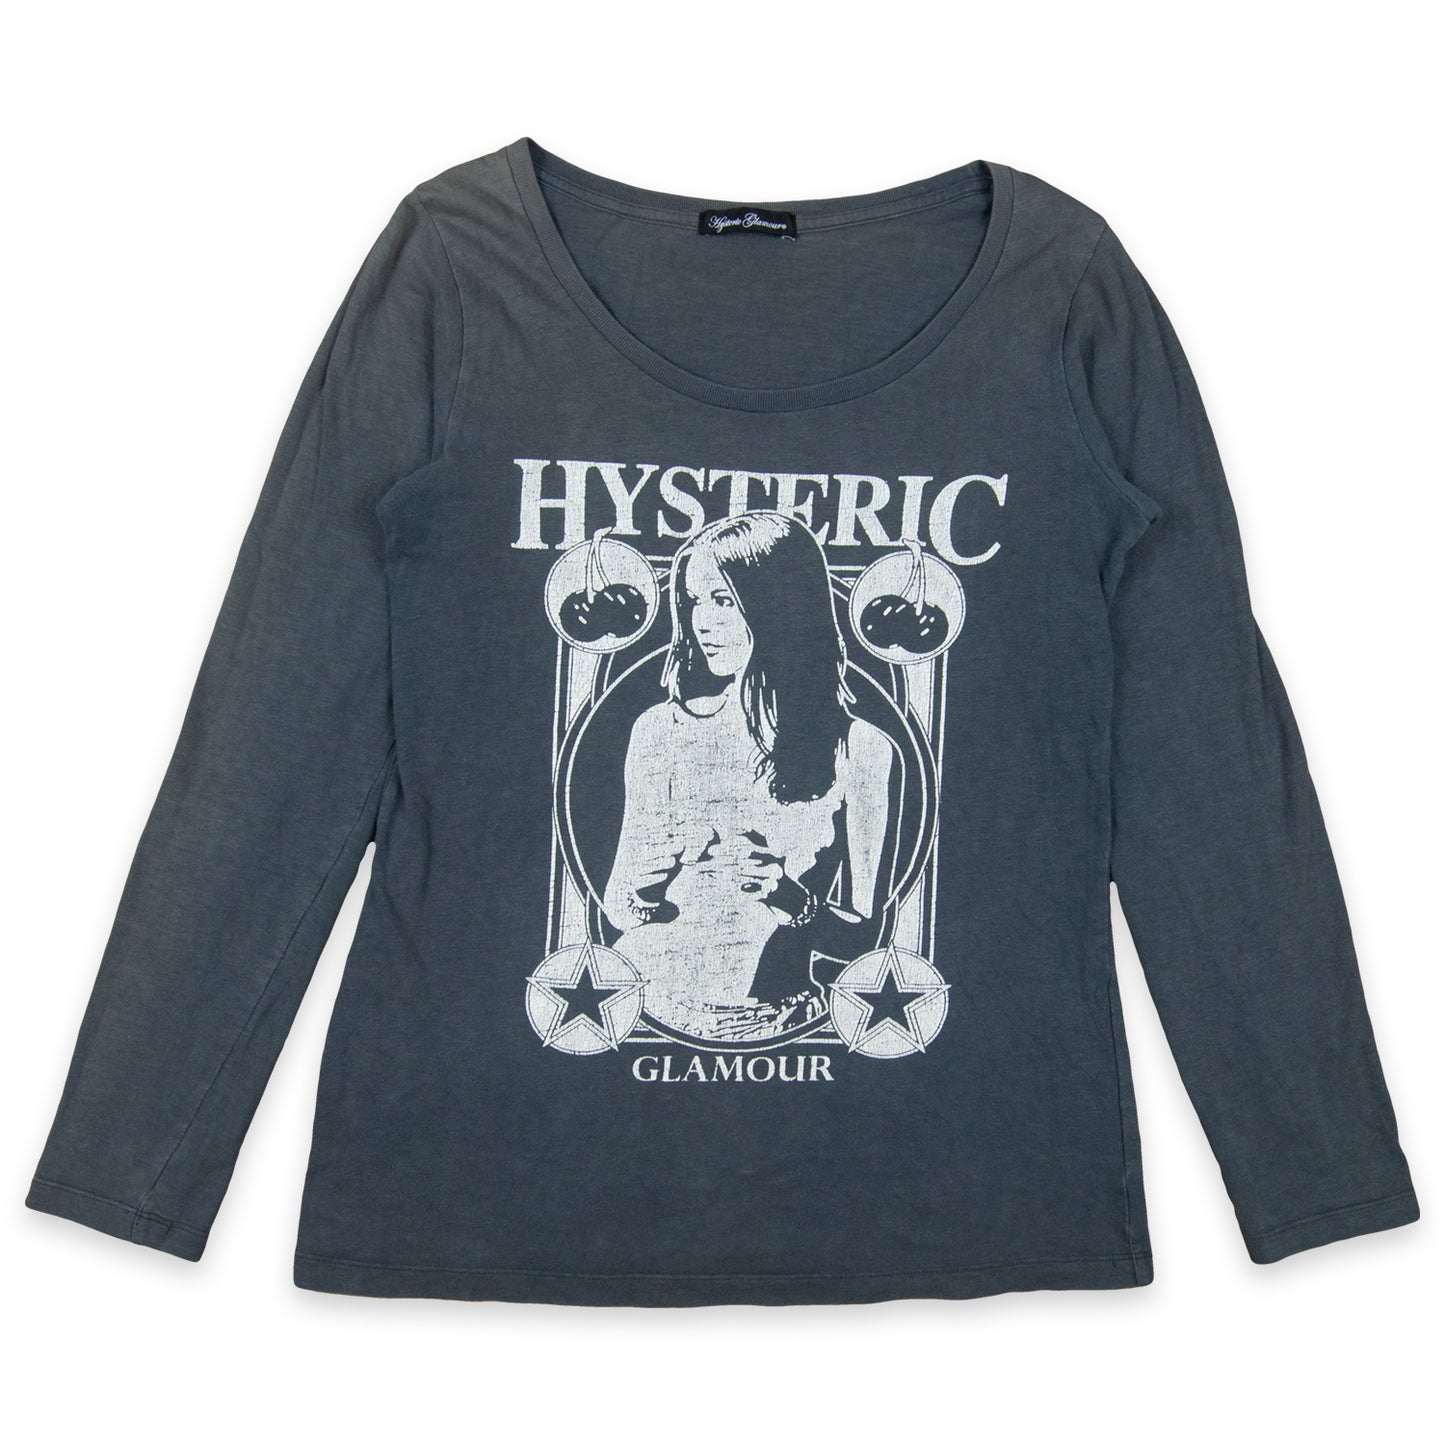 Hysteric Glamour Cherry Star Pin Up Logo Long Sleeve Tee